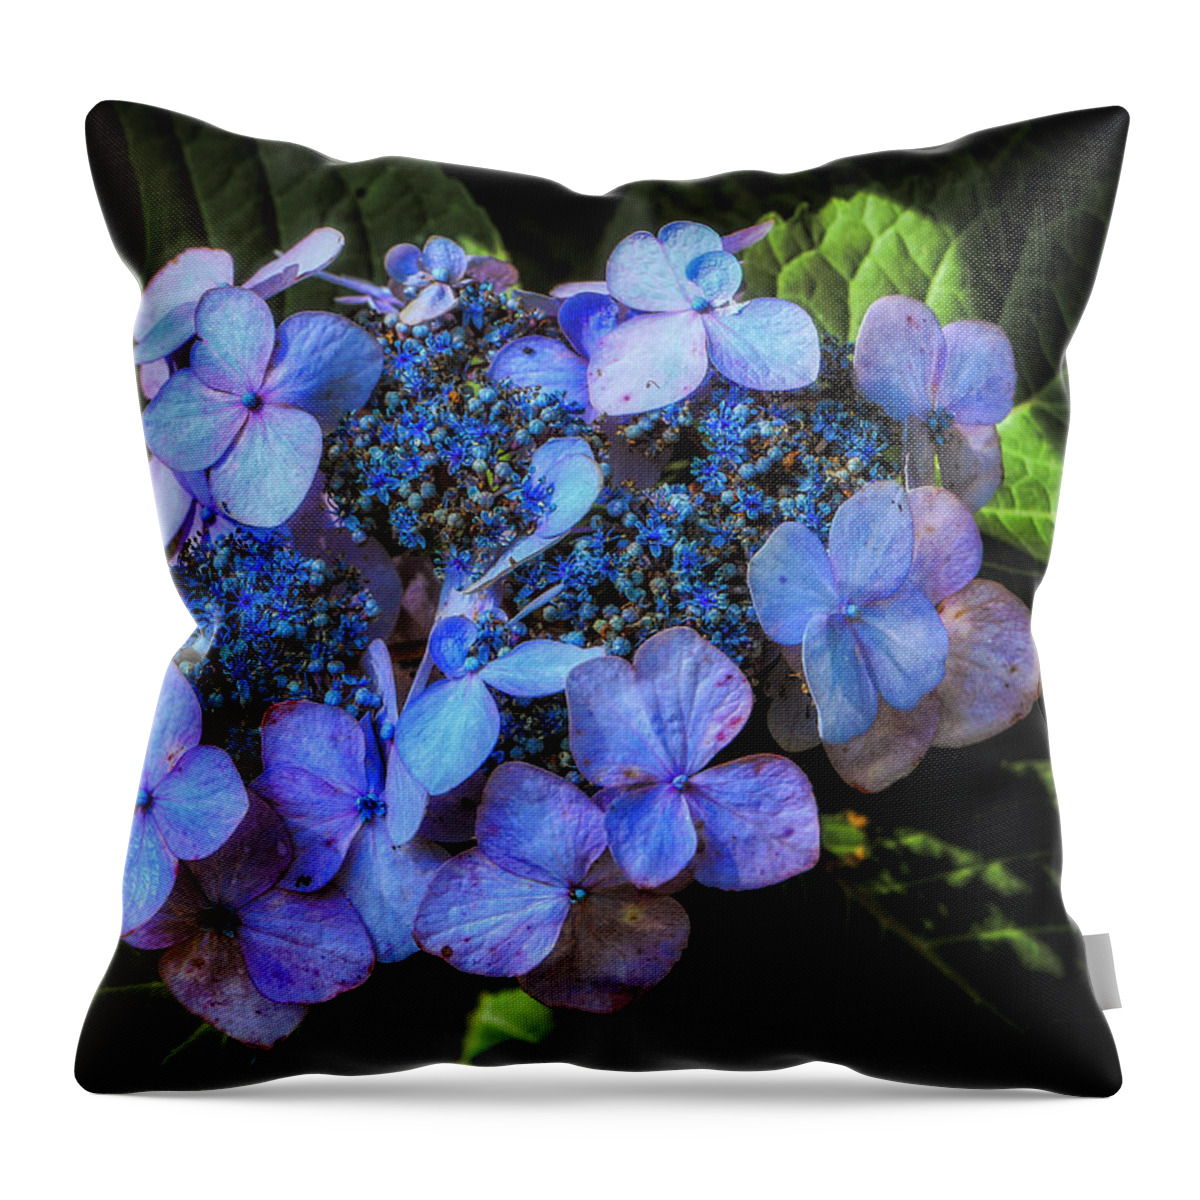 Flowers Throw Pillow featuring the photograph Blue In Nature by Elaine Malott